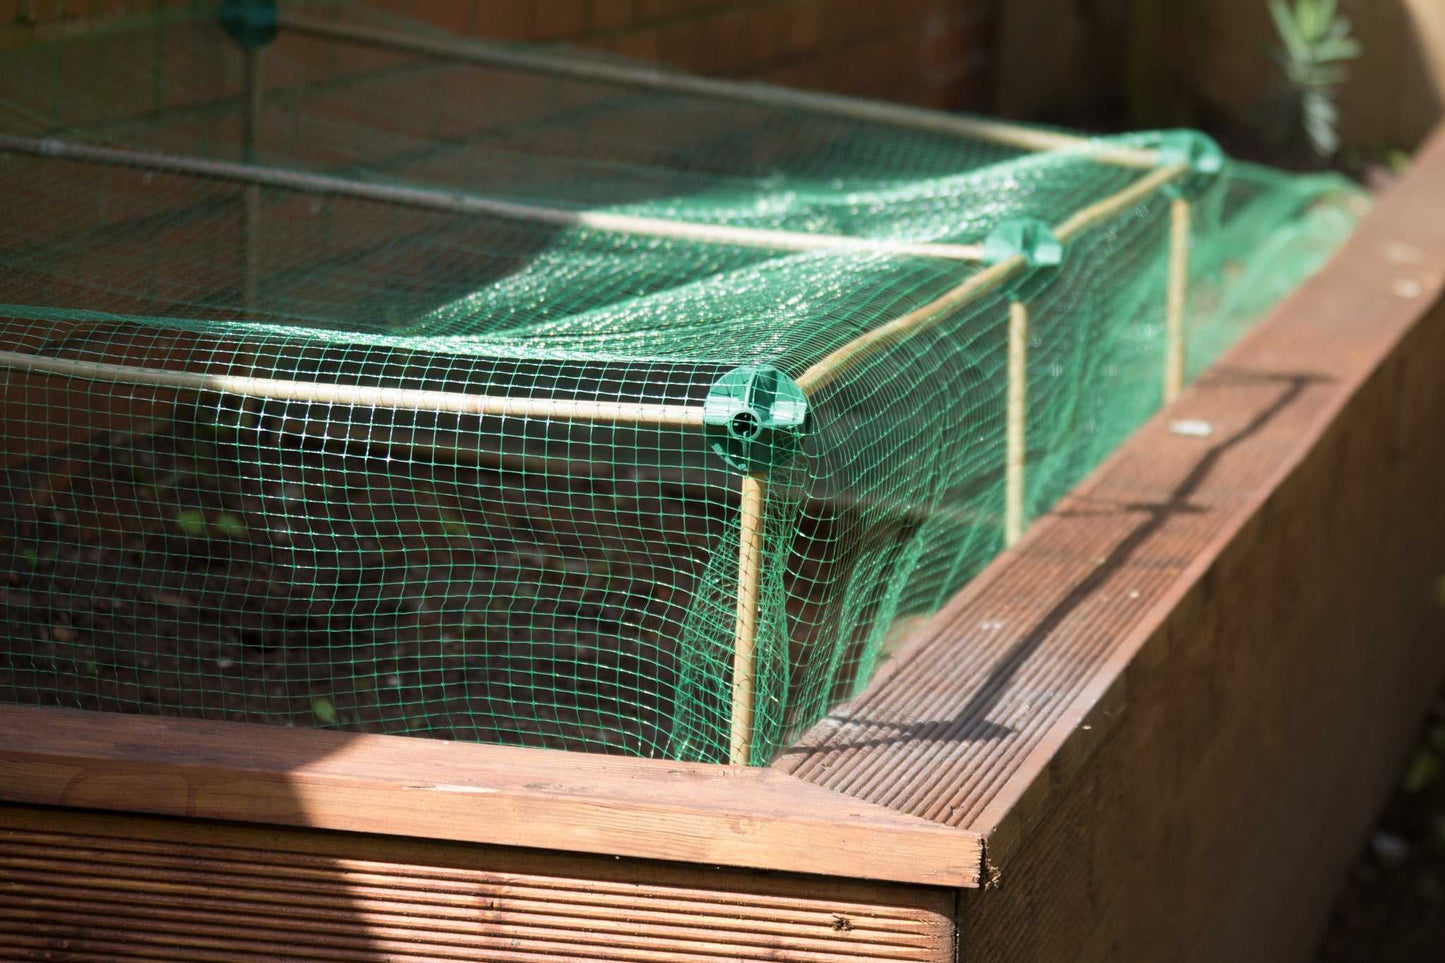 Cane Balls - Build netting cages and plant structures the simple way.-2